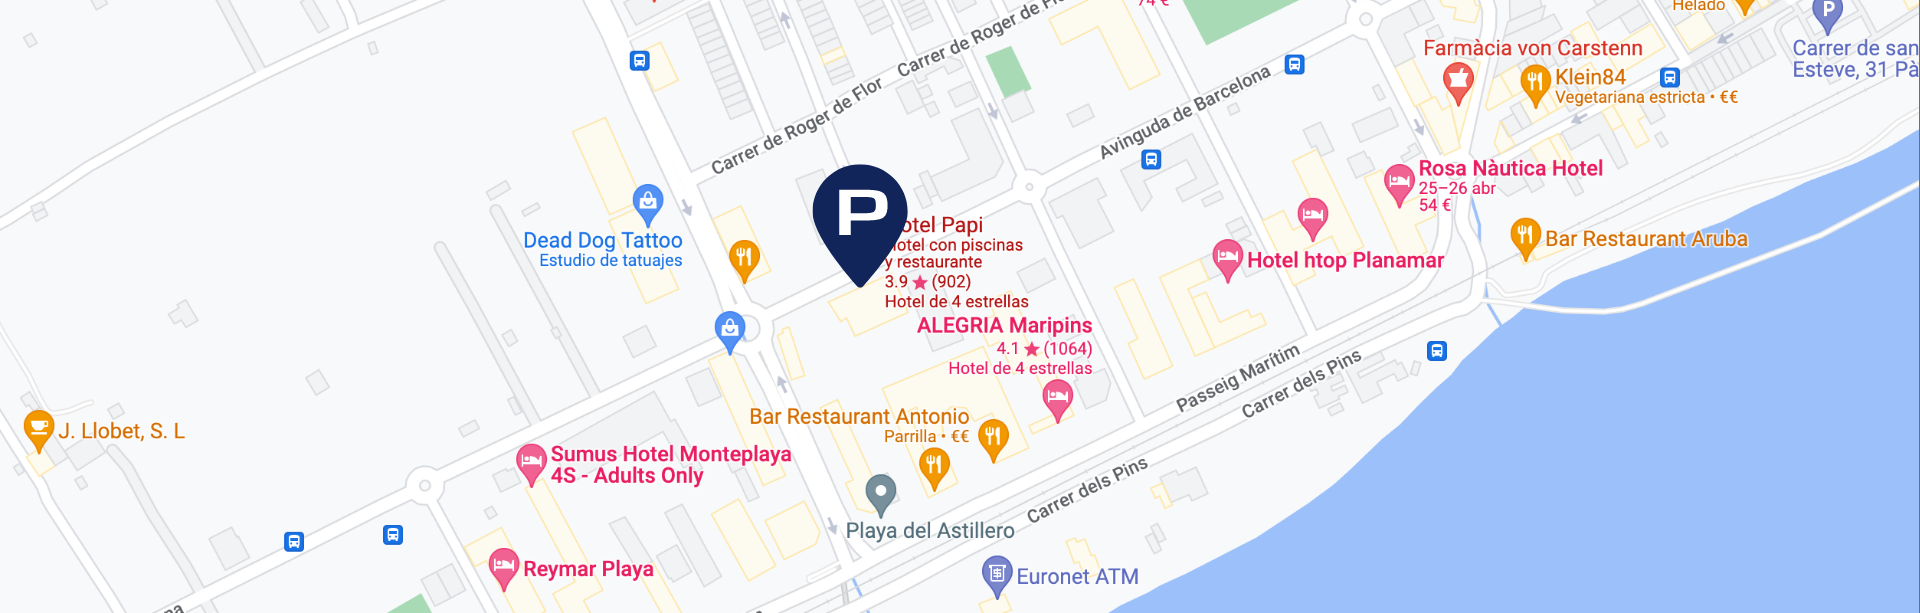 How to get to Hotel Papi Blau